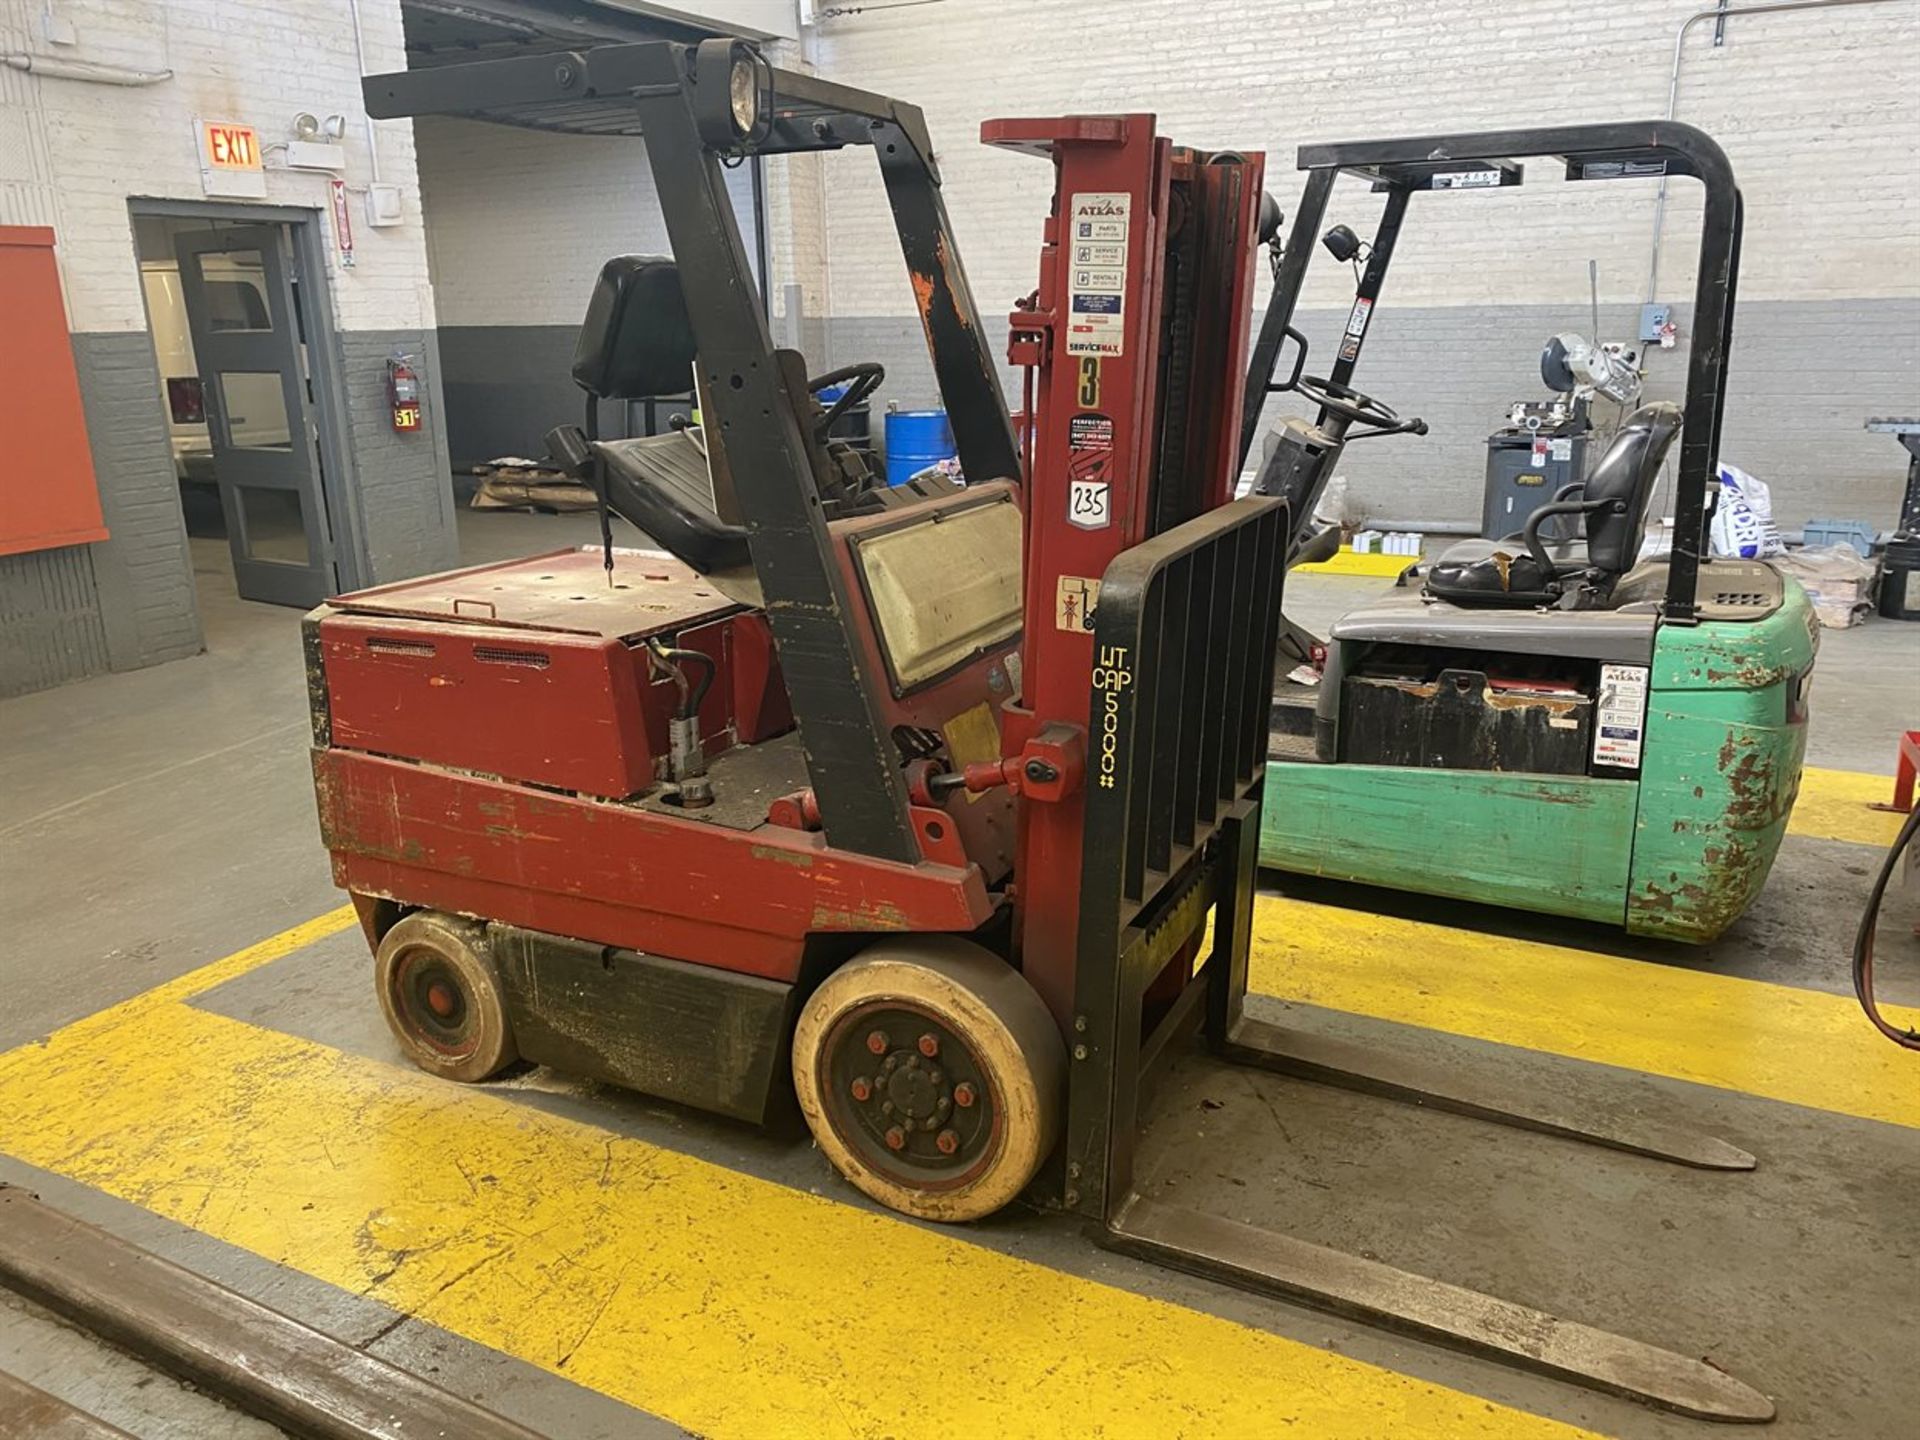 TOYOTA 2FBCA25 Electric Forklift, s/n 11711, 5000 LB Capacity, Triple Mast, (Not Currently Running)